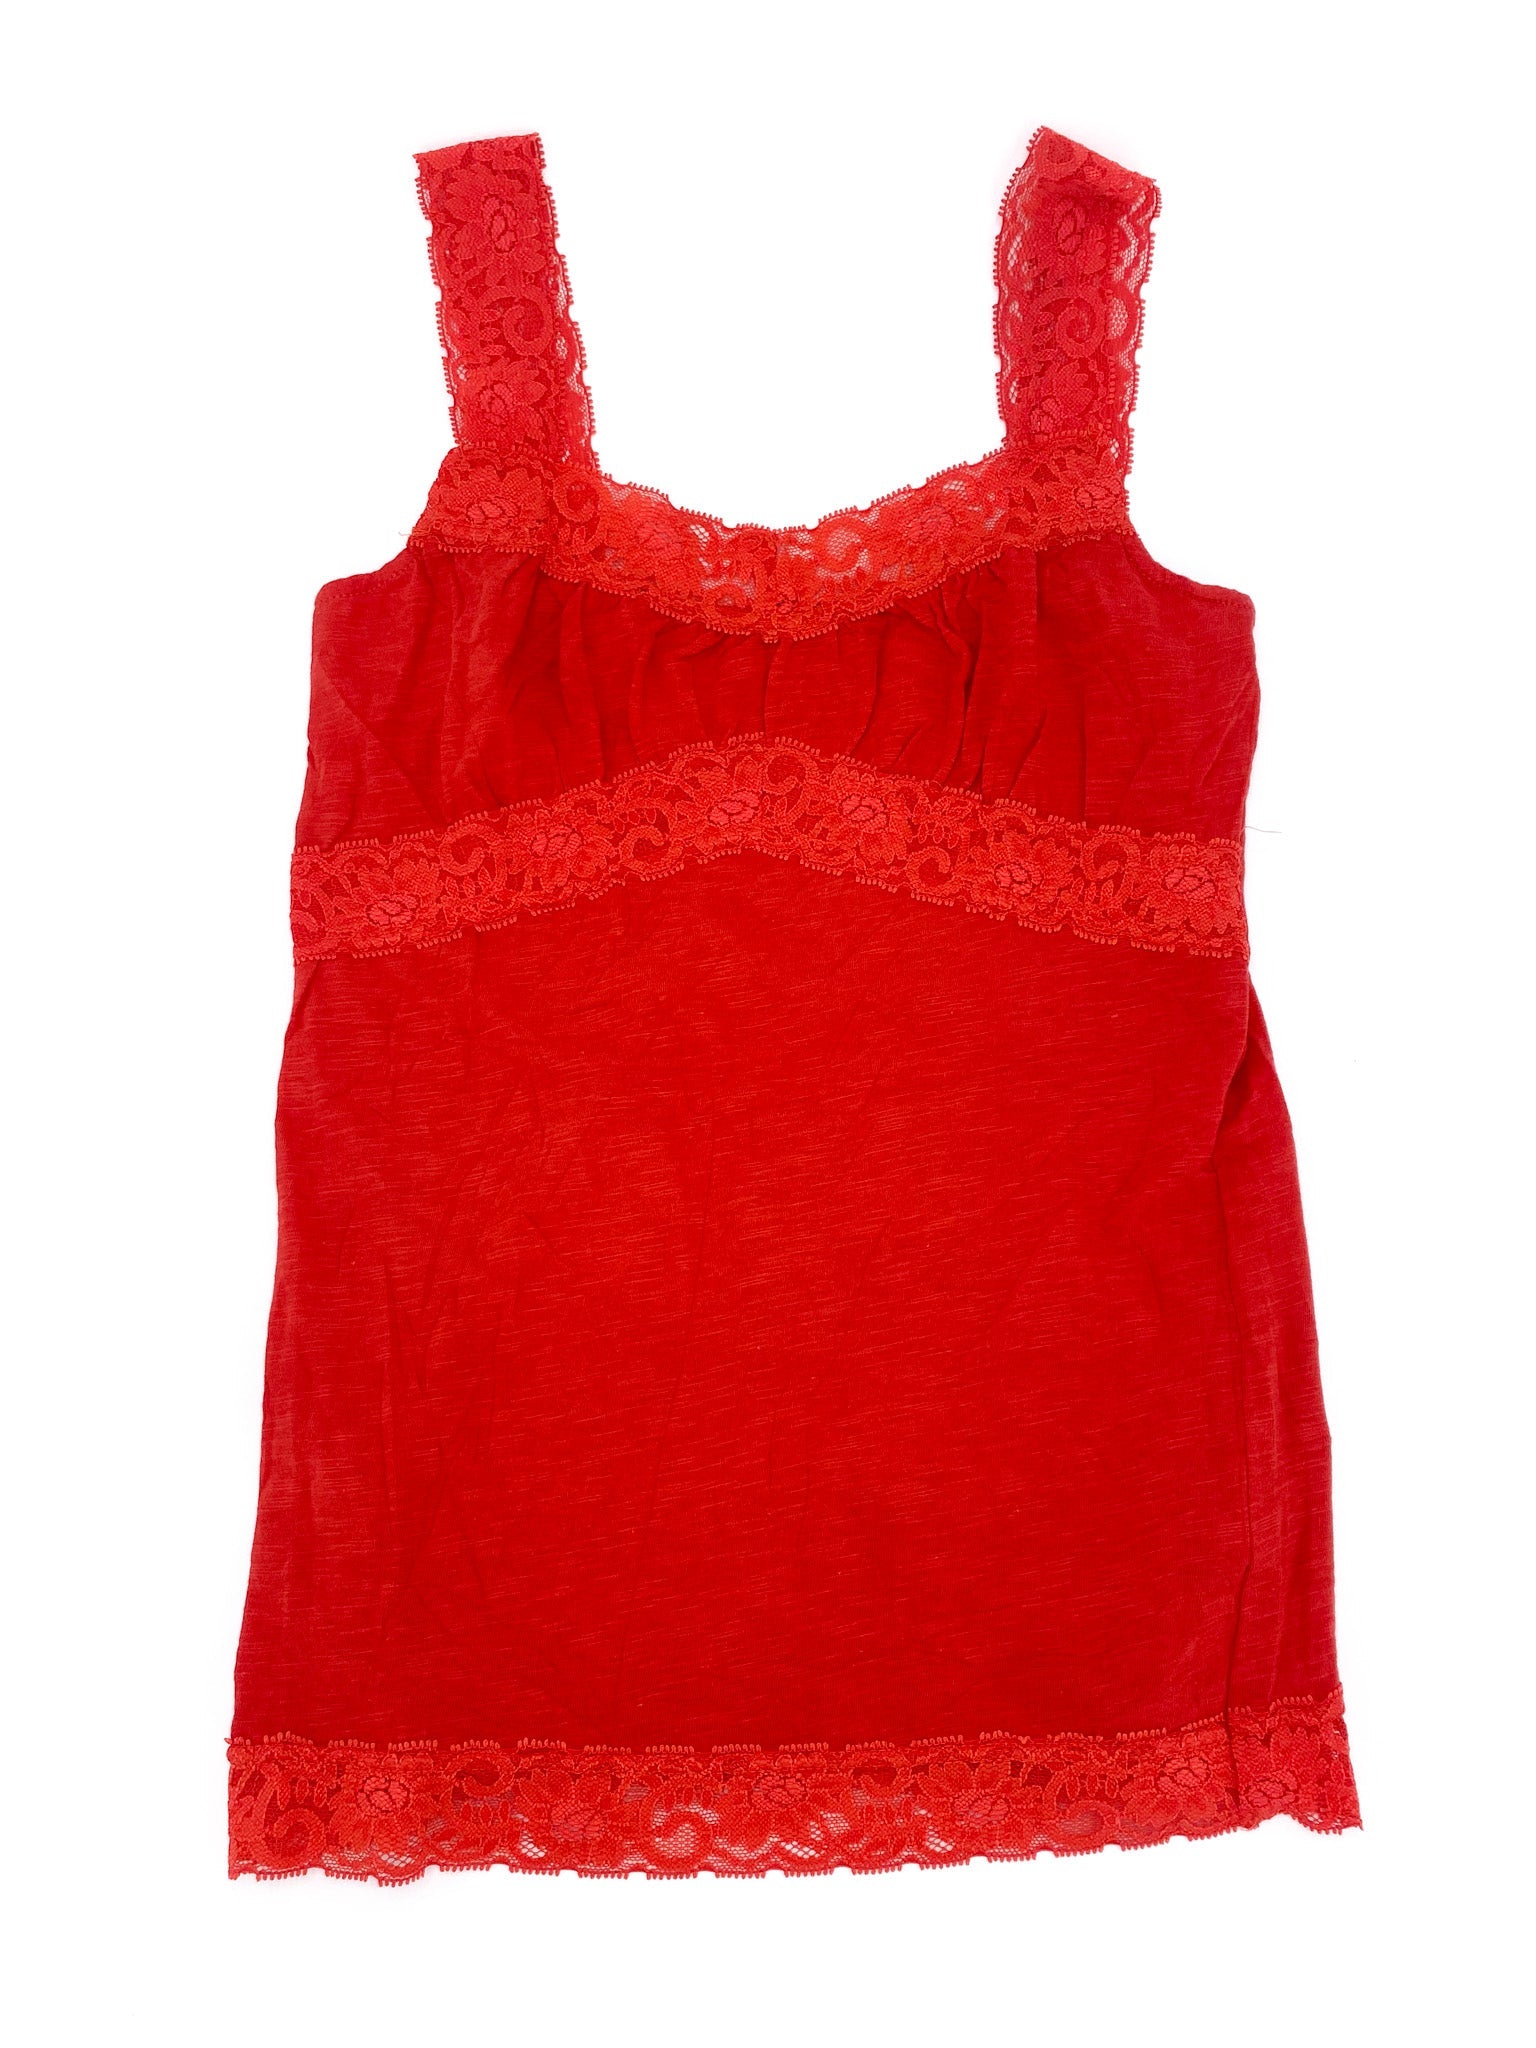 Vintage 00's Red Lace Tank - S - Playground Vintage